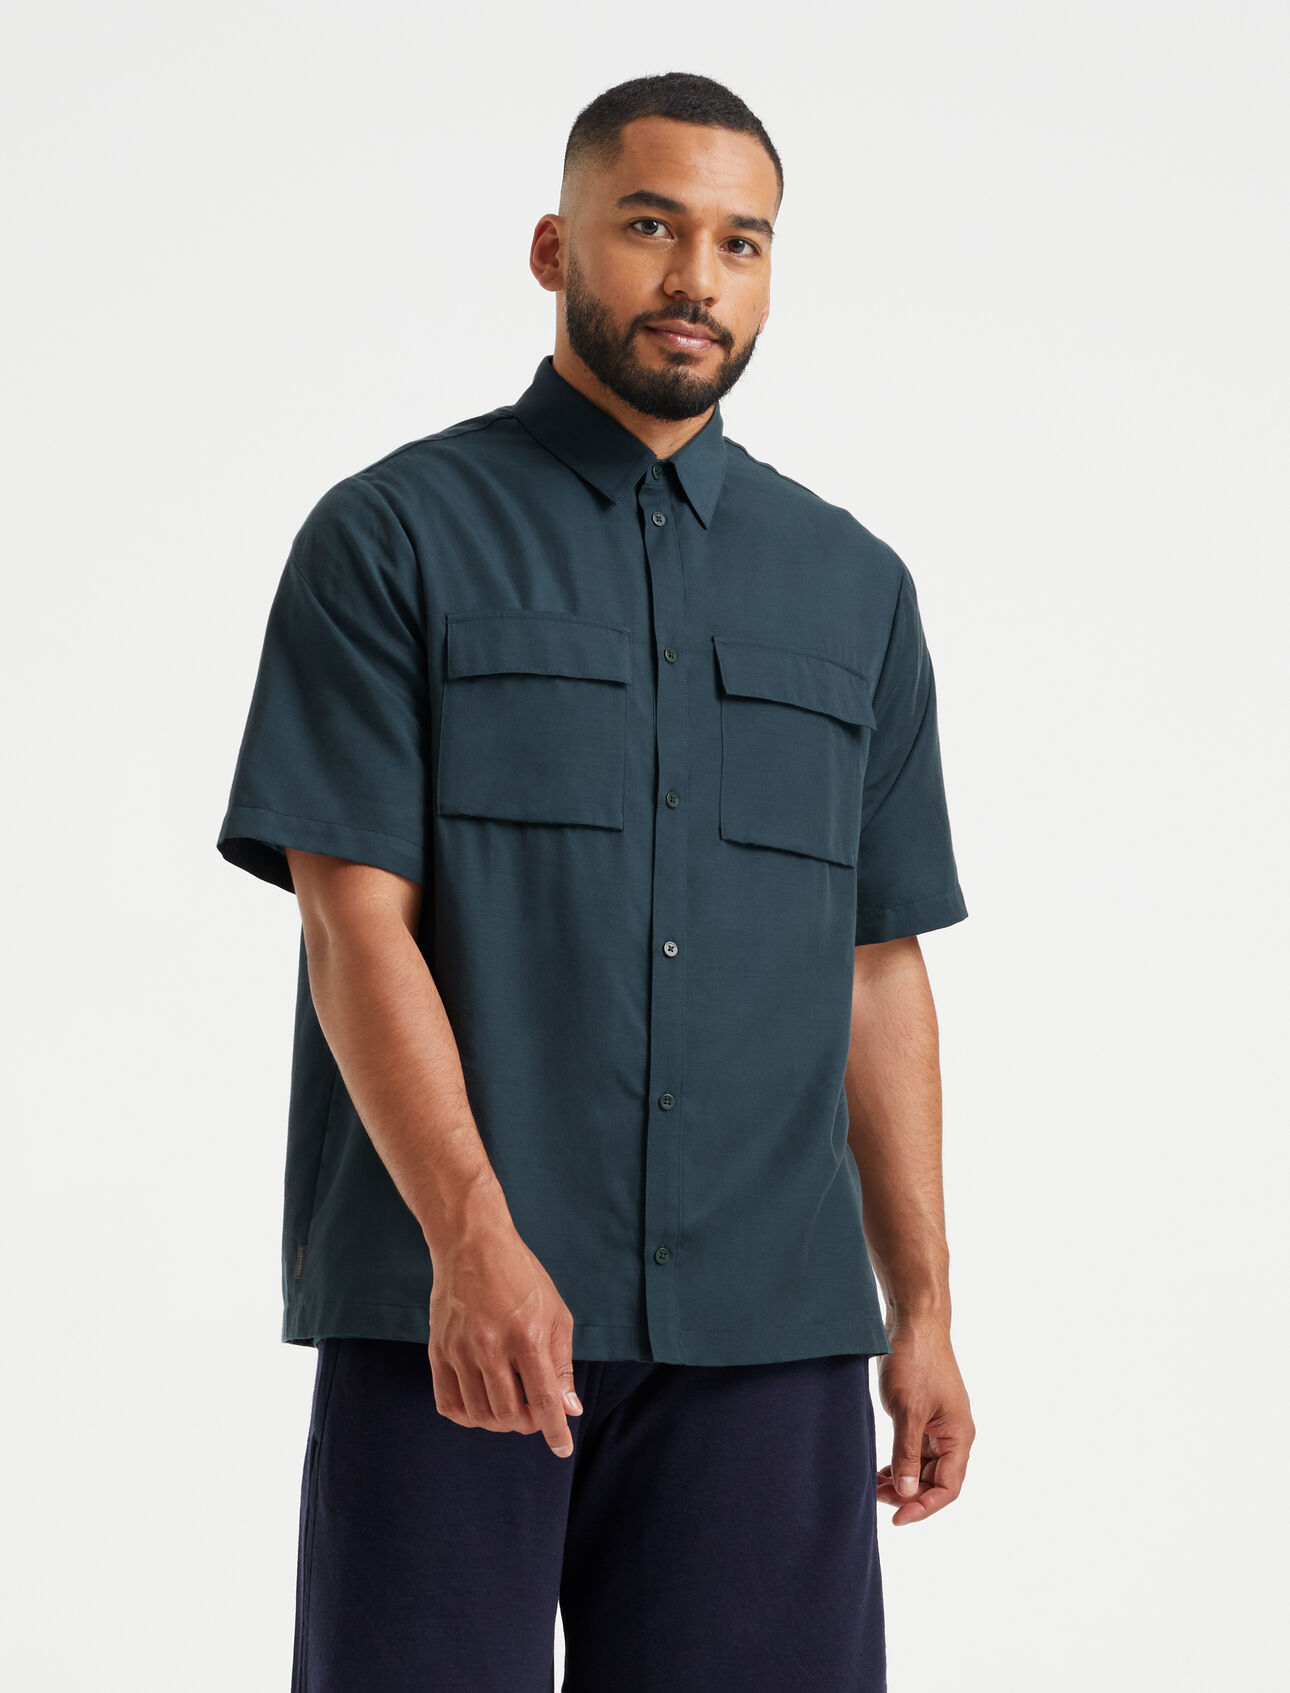 Mens Merino Natural Blend Short Sleeve Double Pocket Shirt An ultra-lightweight shirt made from our breathable Cool-Lite™ woven fabric, the Merino Natural Blend Short Sleeve Double Pocket Shirt offerscool comfort with modern style.